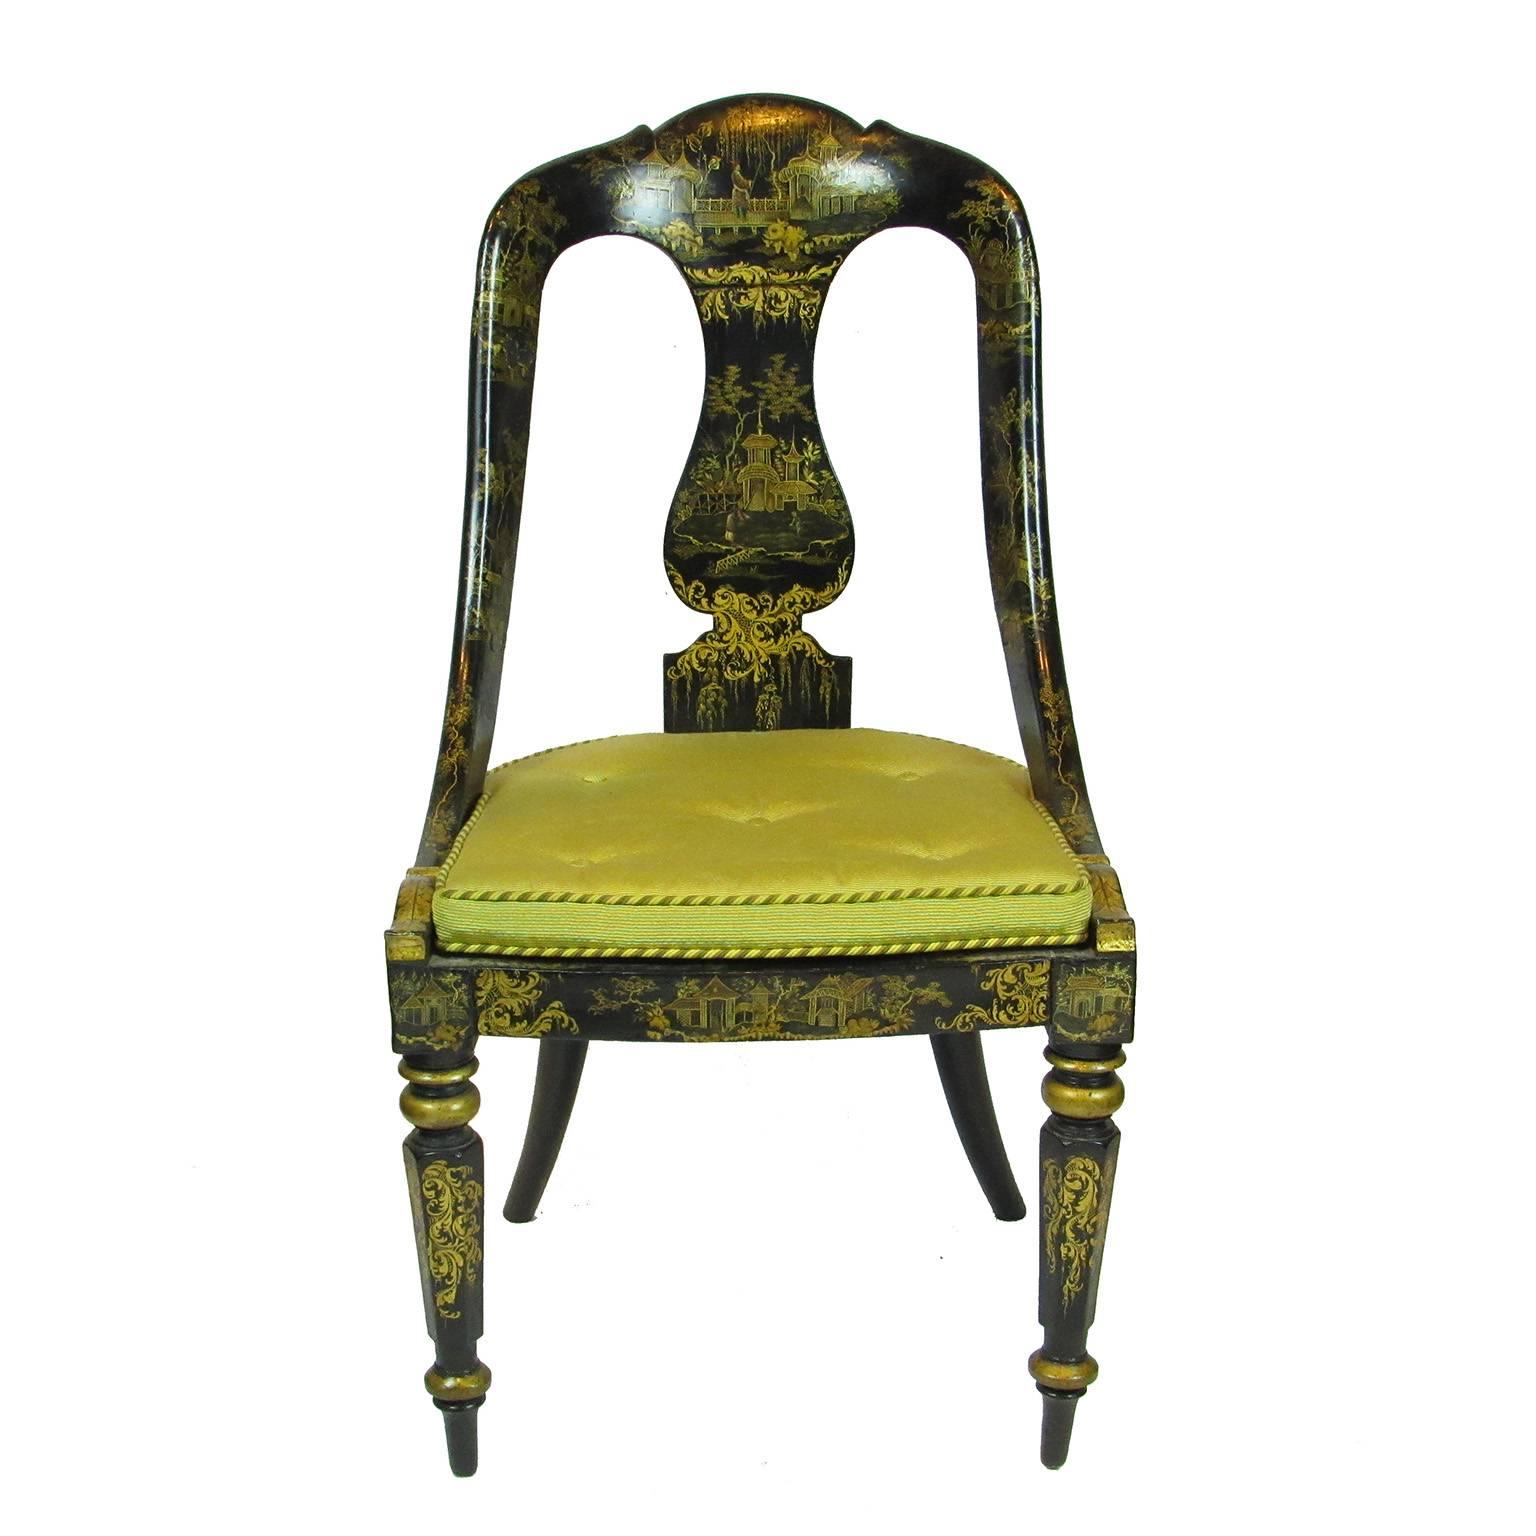 Antique 19th century pair of Japanned and chinoisserie gilt decorated cane seat chairs, japanned in black with gilt chinoisserie decoration, gold seat cushions, shaped central back splat, turned legs ending in arrow feet; Overall height: 37 inches;